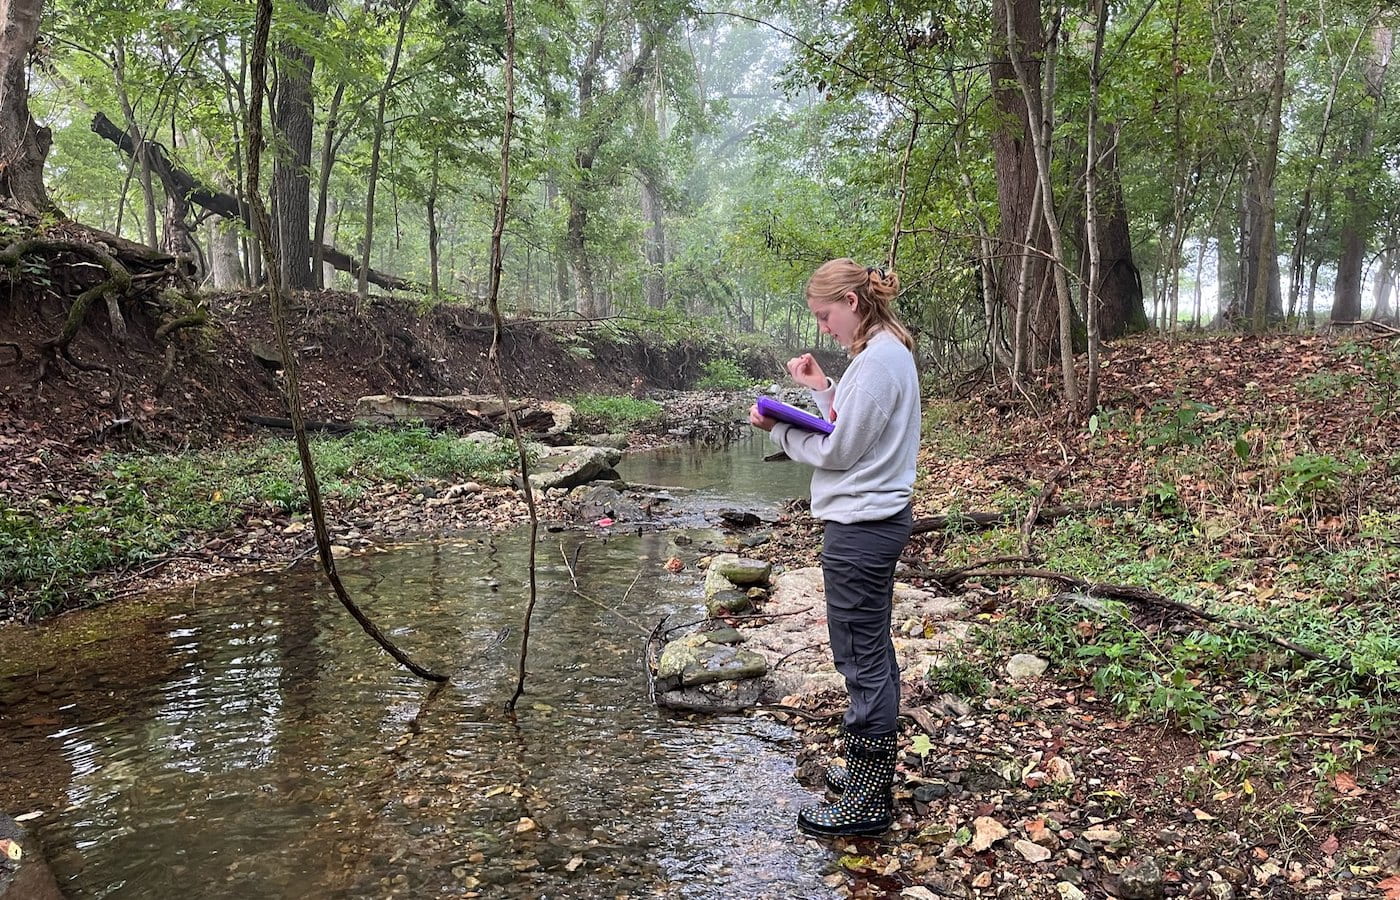 HEADWATERS — Kathleen Cutting takes stream monitoring notes on Brush Creek, a headwater stream of the White River and part of the Beaver Lake watershed.